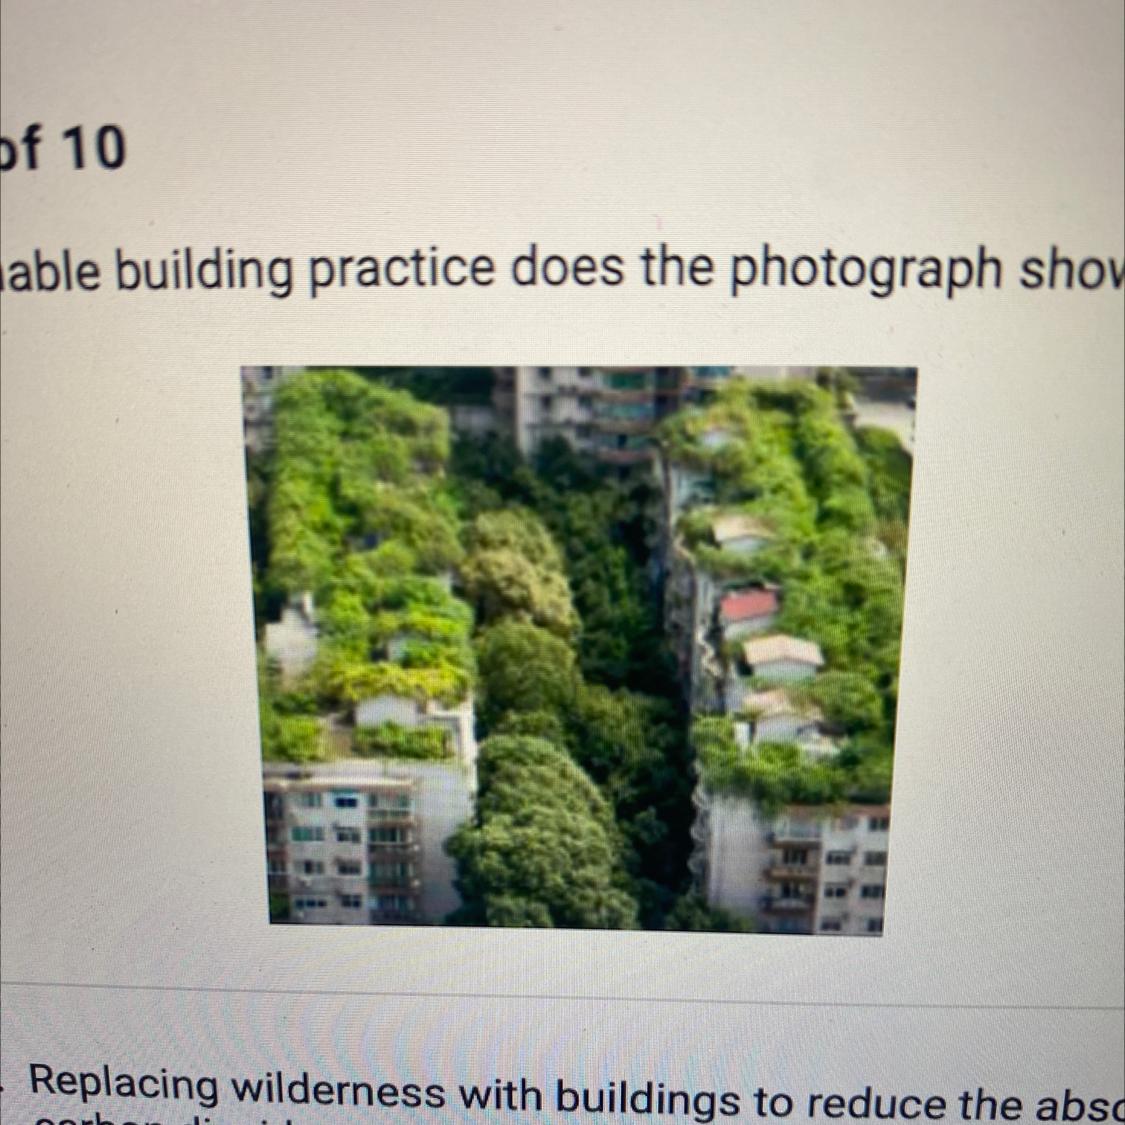 Which Sustainable Building Practice Does The Photograph Show?A. Replacing Wilderness With Buildings To